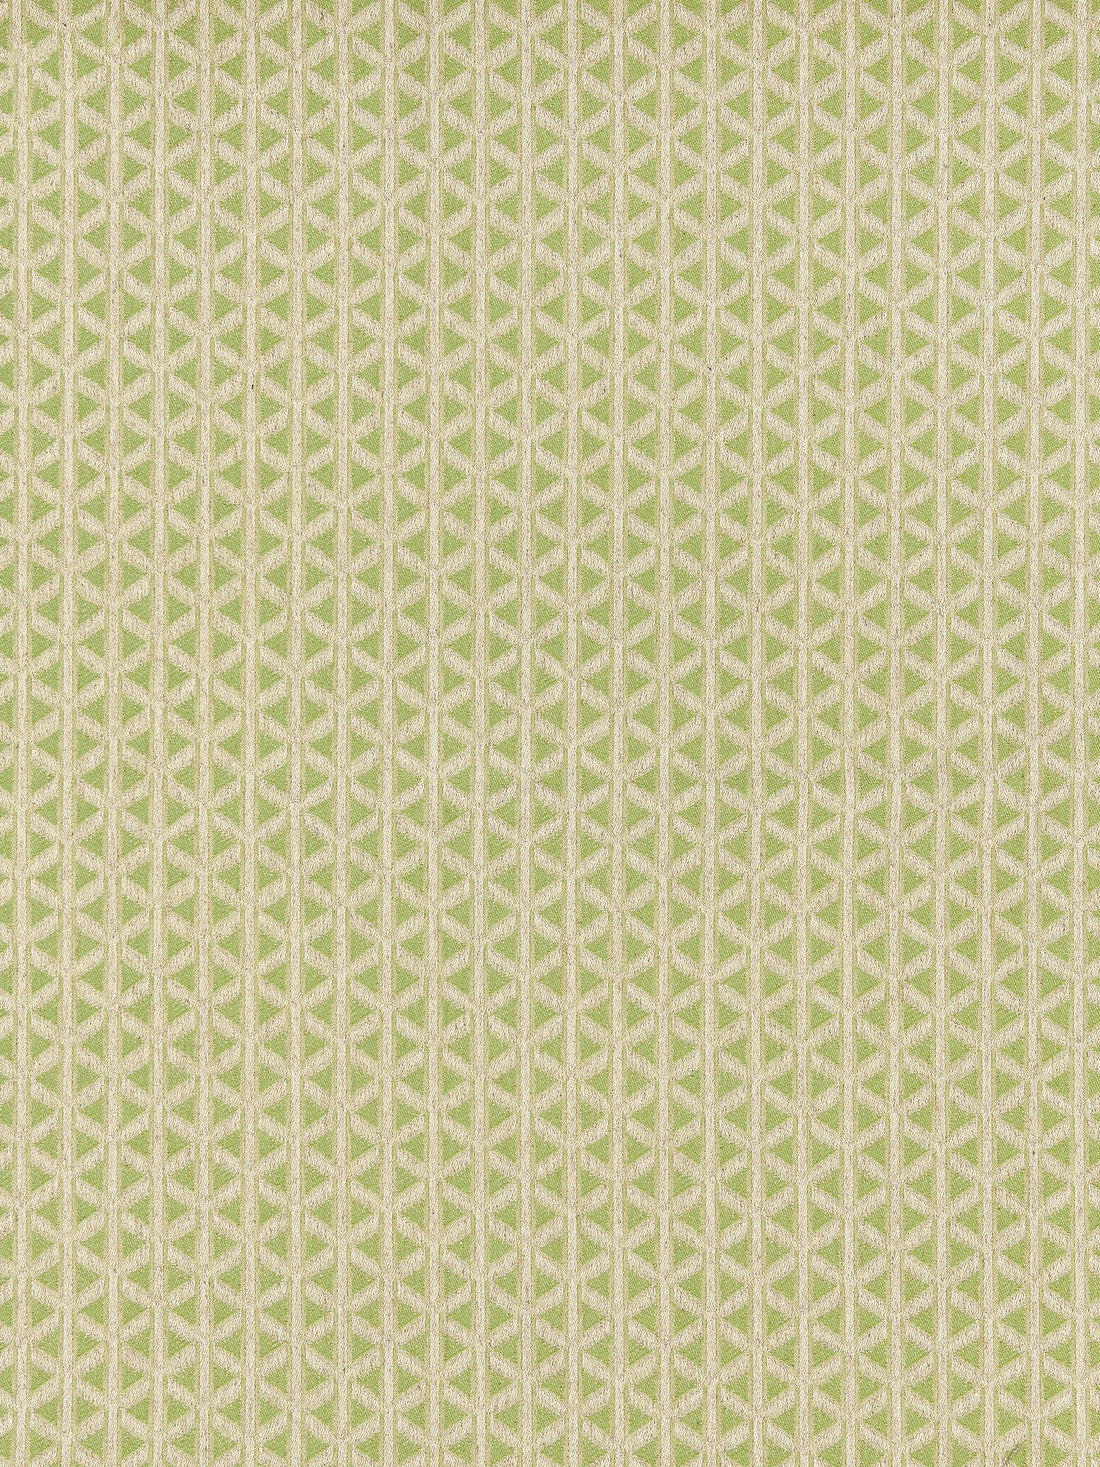 Cross Channel fabric in spring green color - pattern number NK 0003CROS - by Scalamandre in the Old World Weavers collection